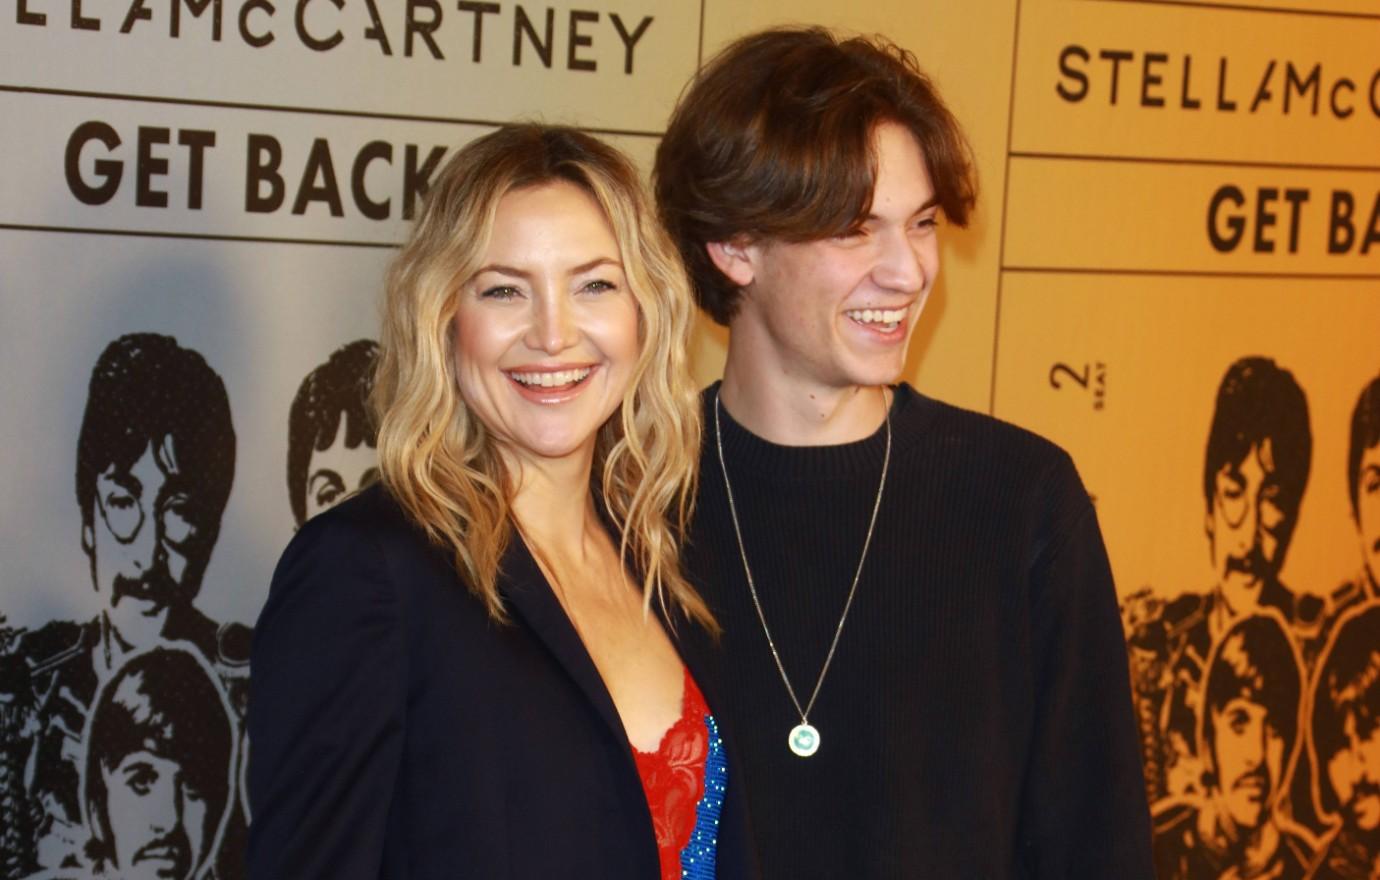 Kate Hudson watches son Ryder, 18, get tattoo of siblings' initials